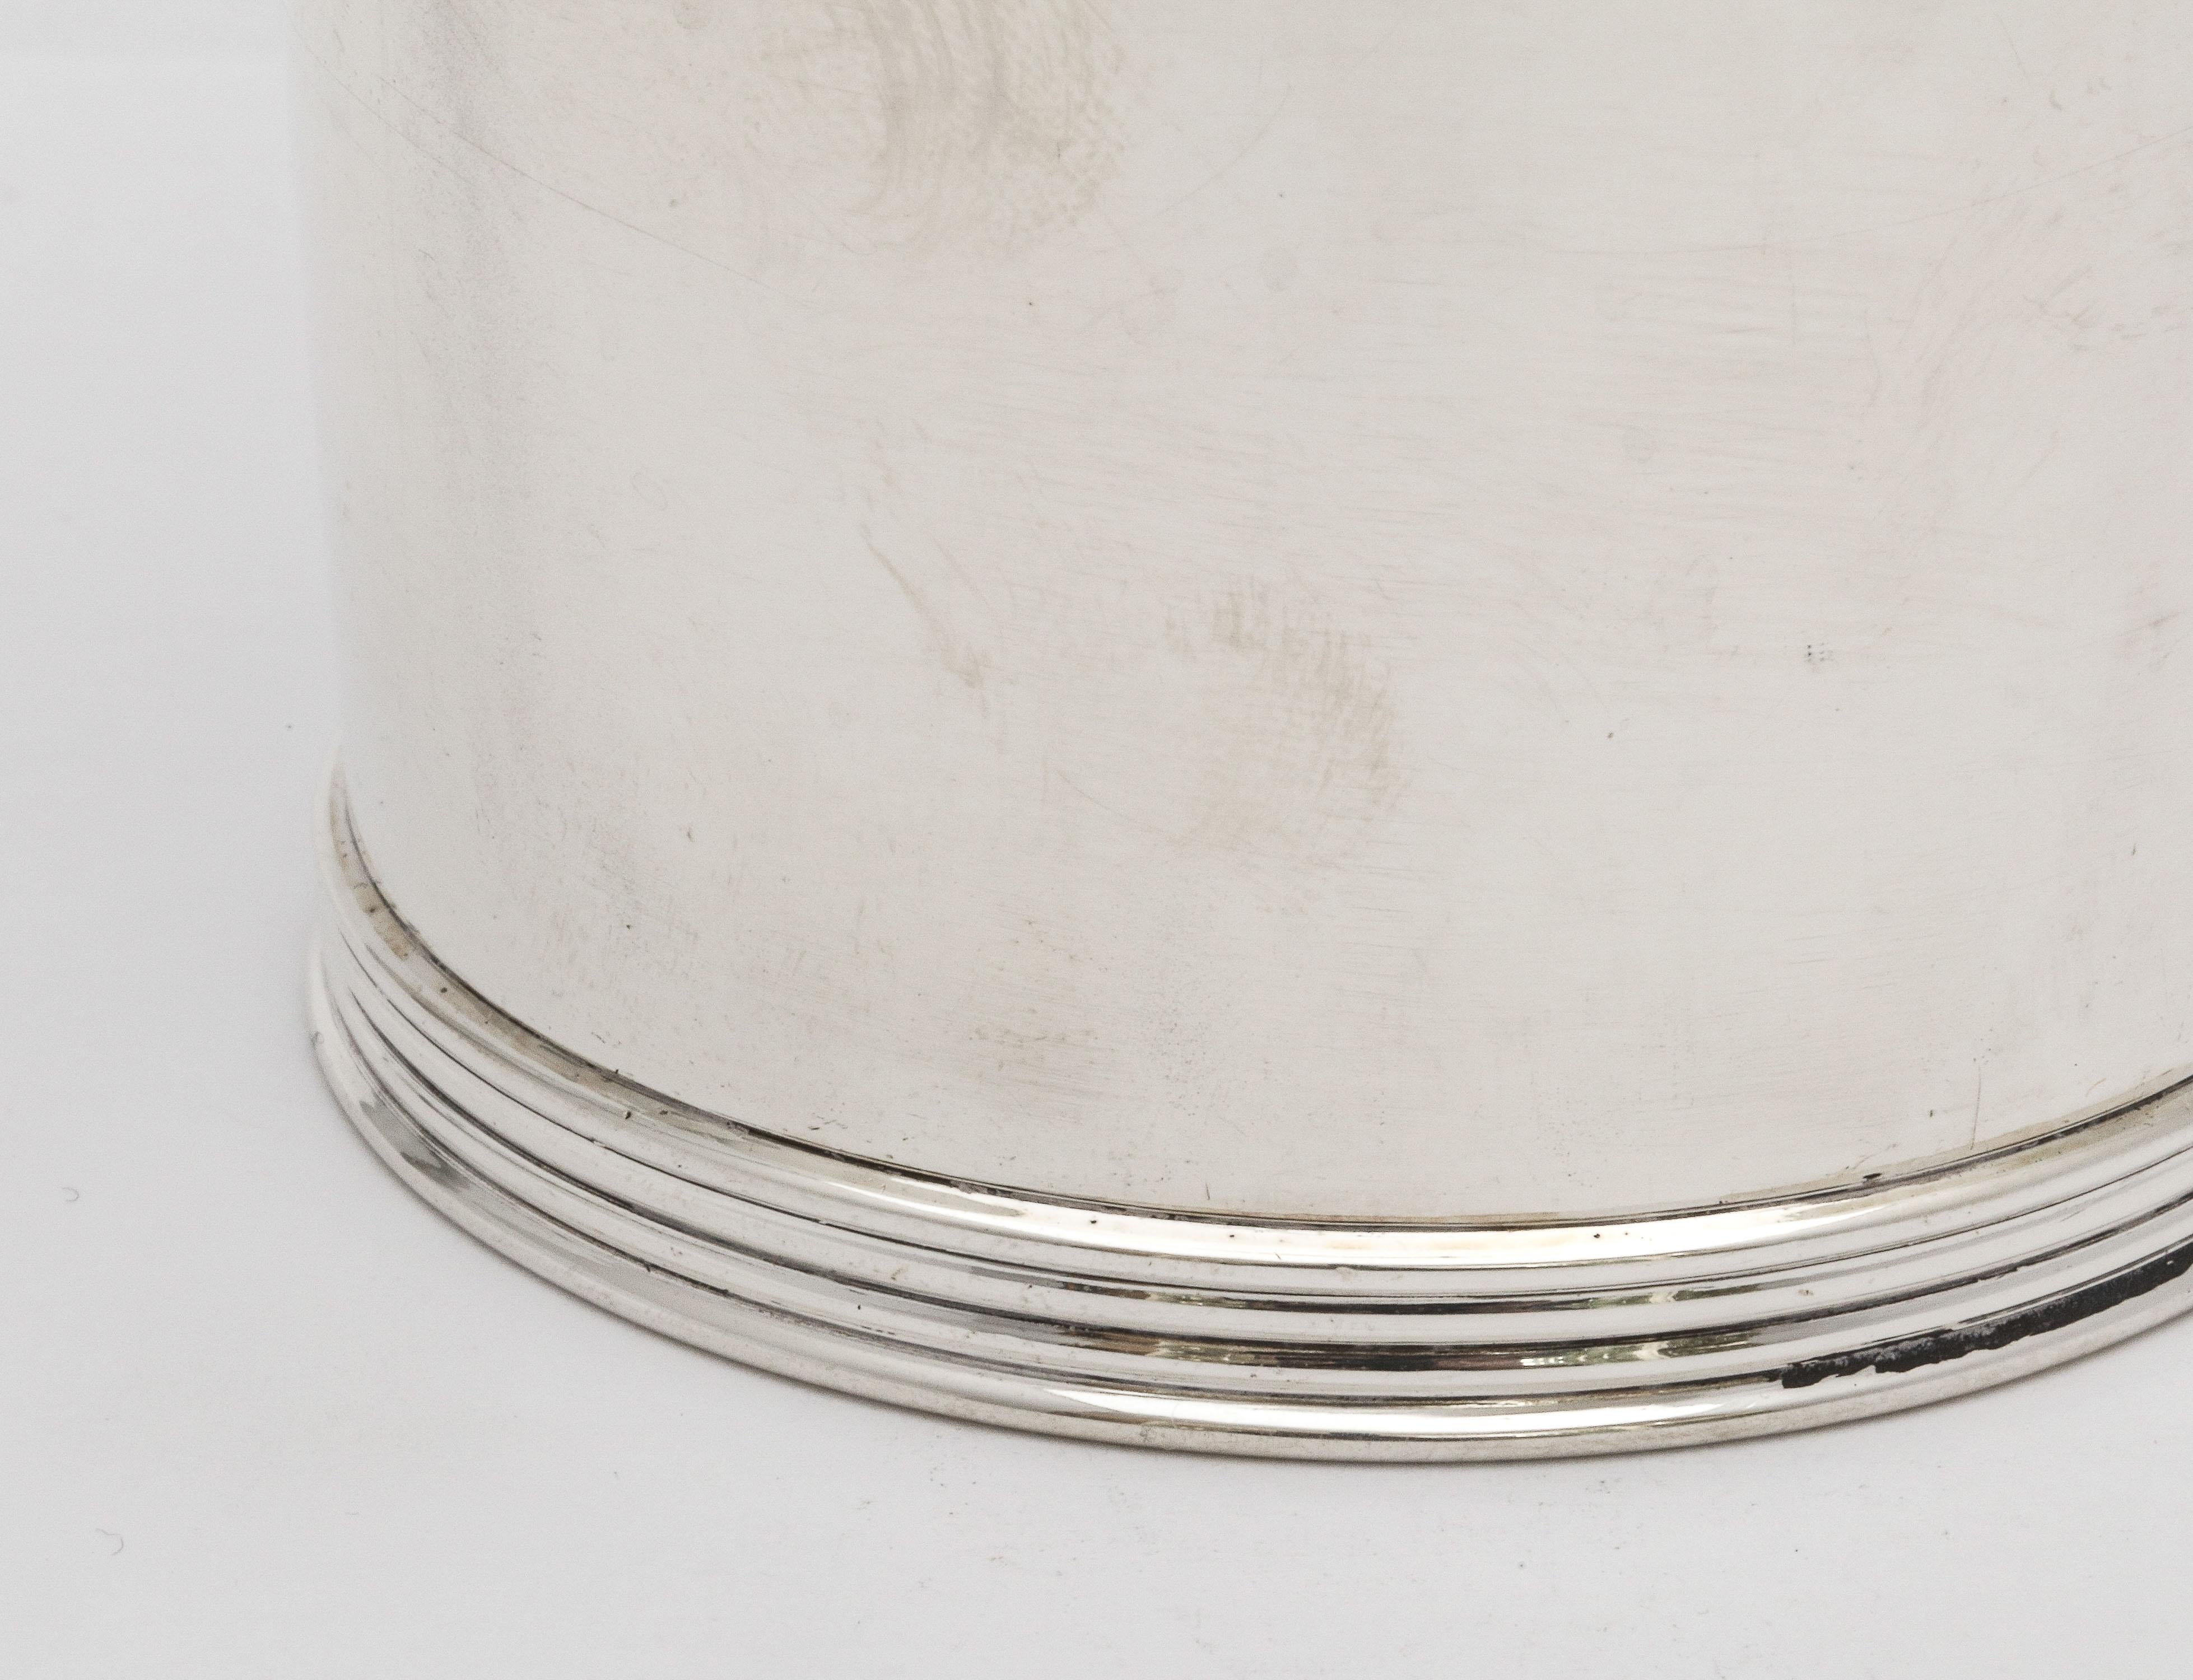 Early 20th Century Edwardian Period Sterling Silver Mint Julep Cup